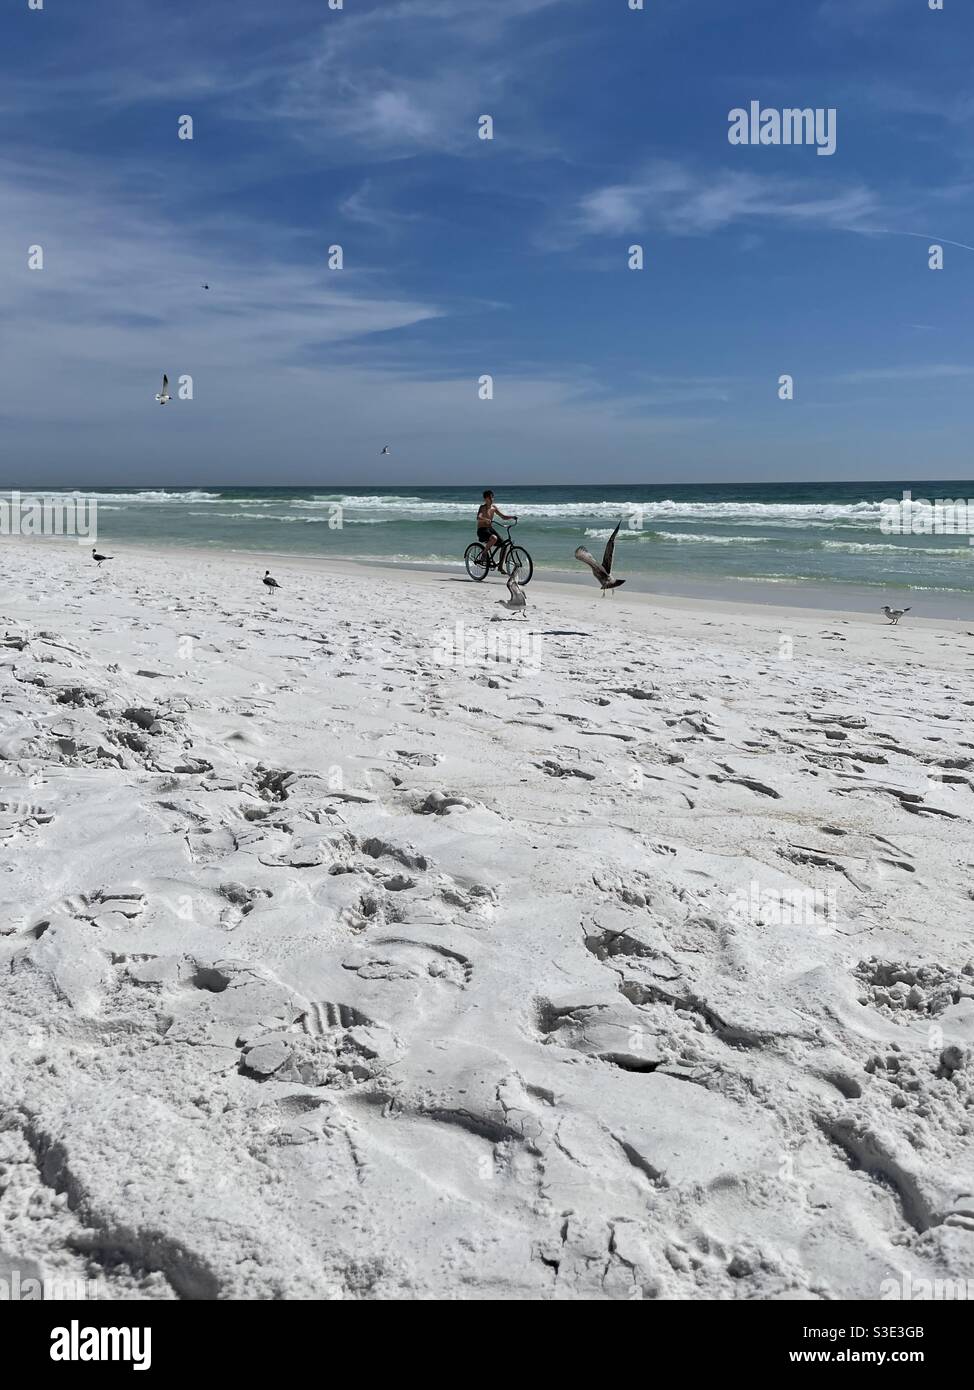 Boy riding a bike on white sand beach with seagulls flying around him Stock Photo